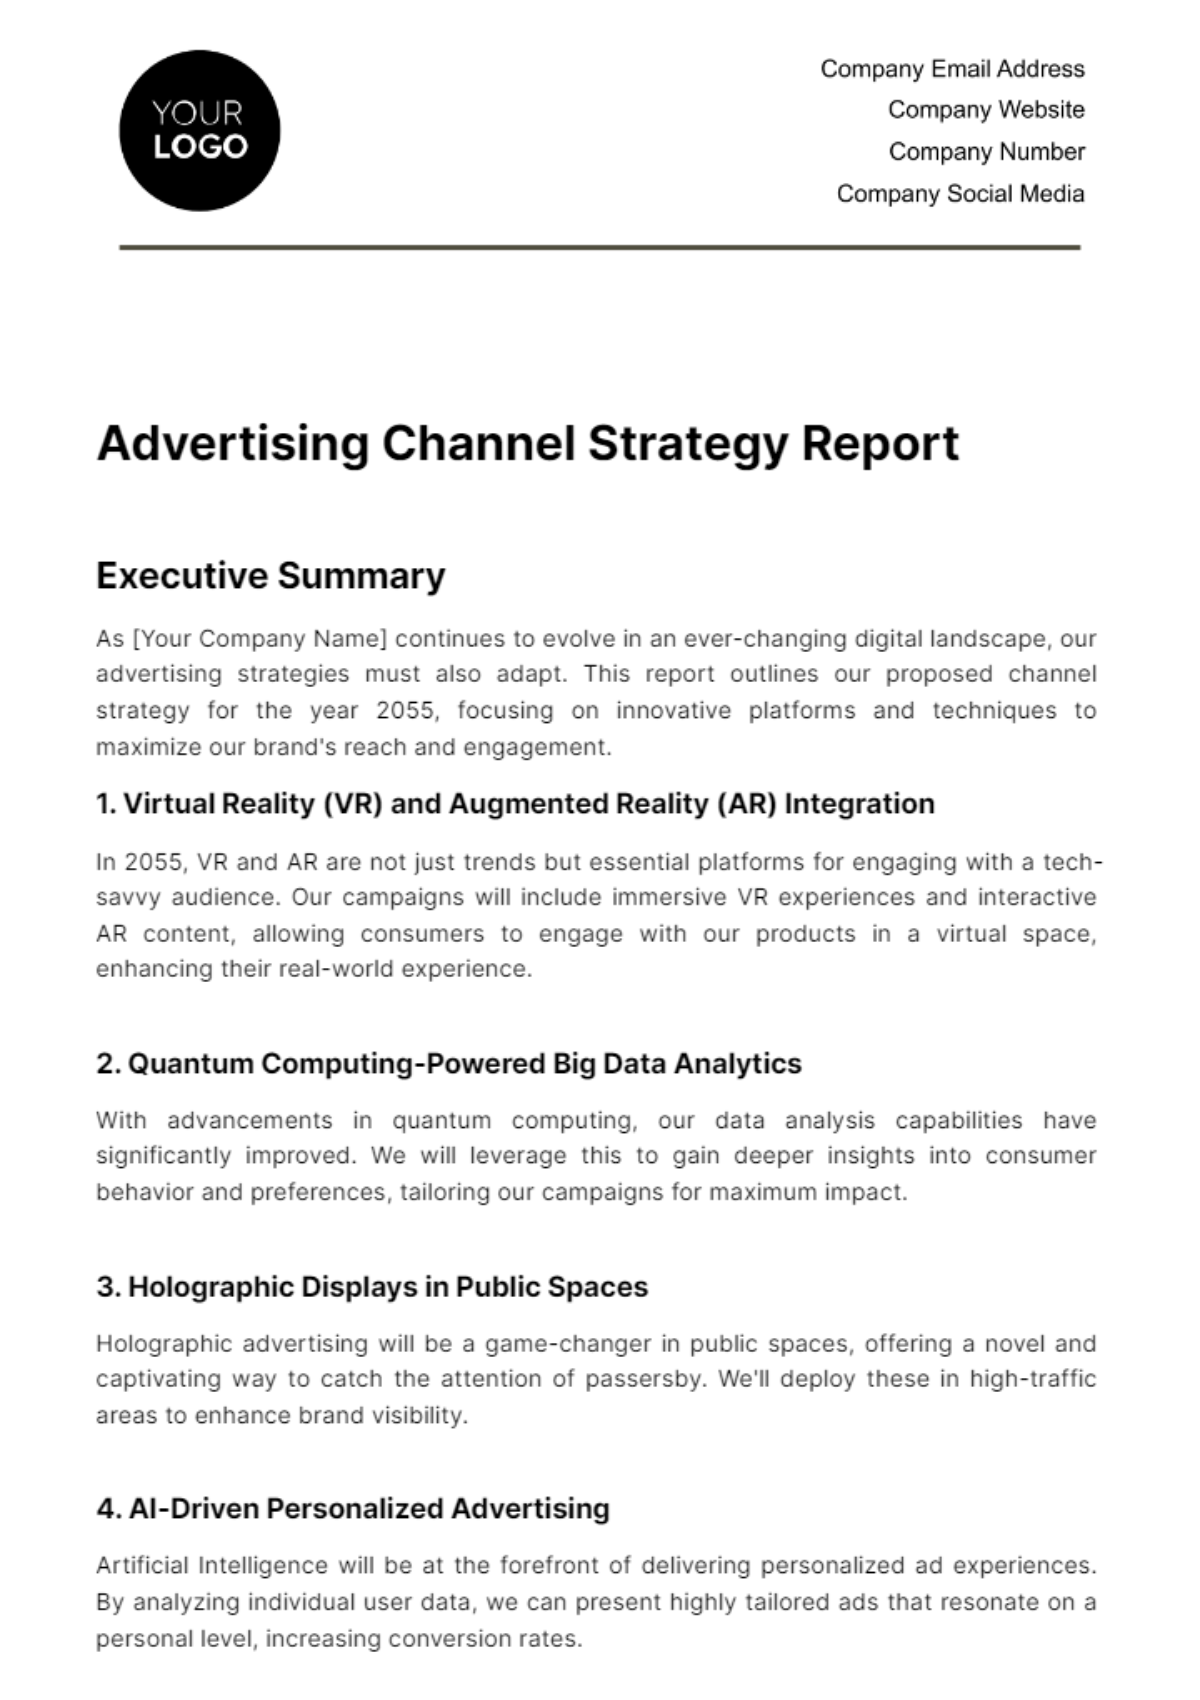 Advertising Channel Strategy Report Template